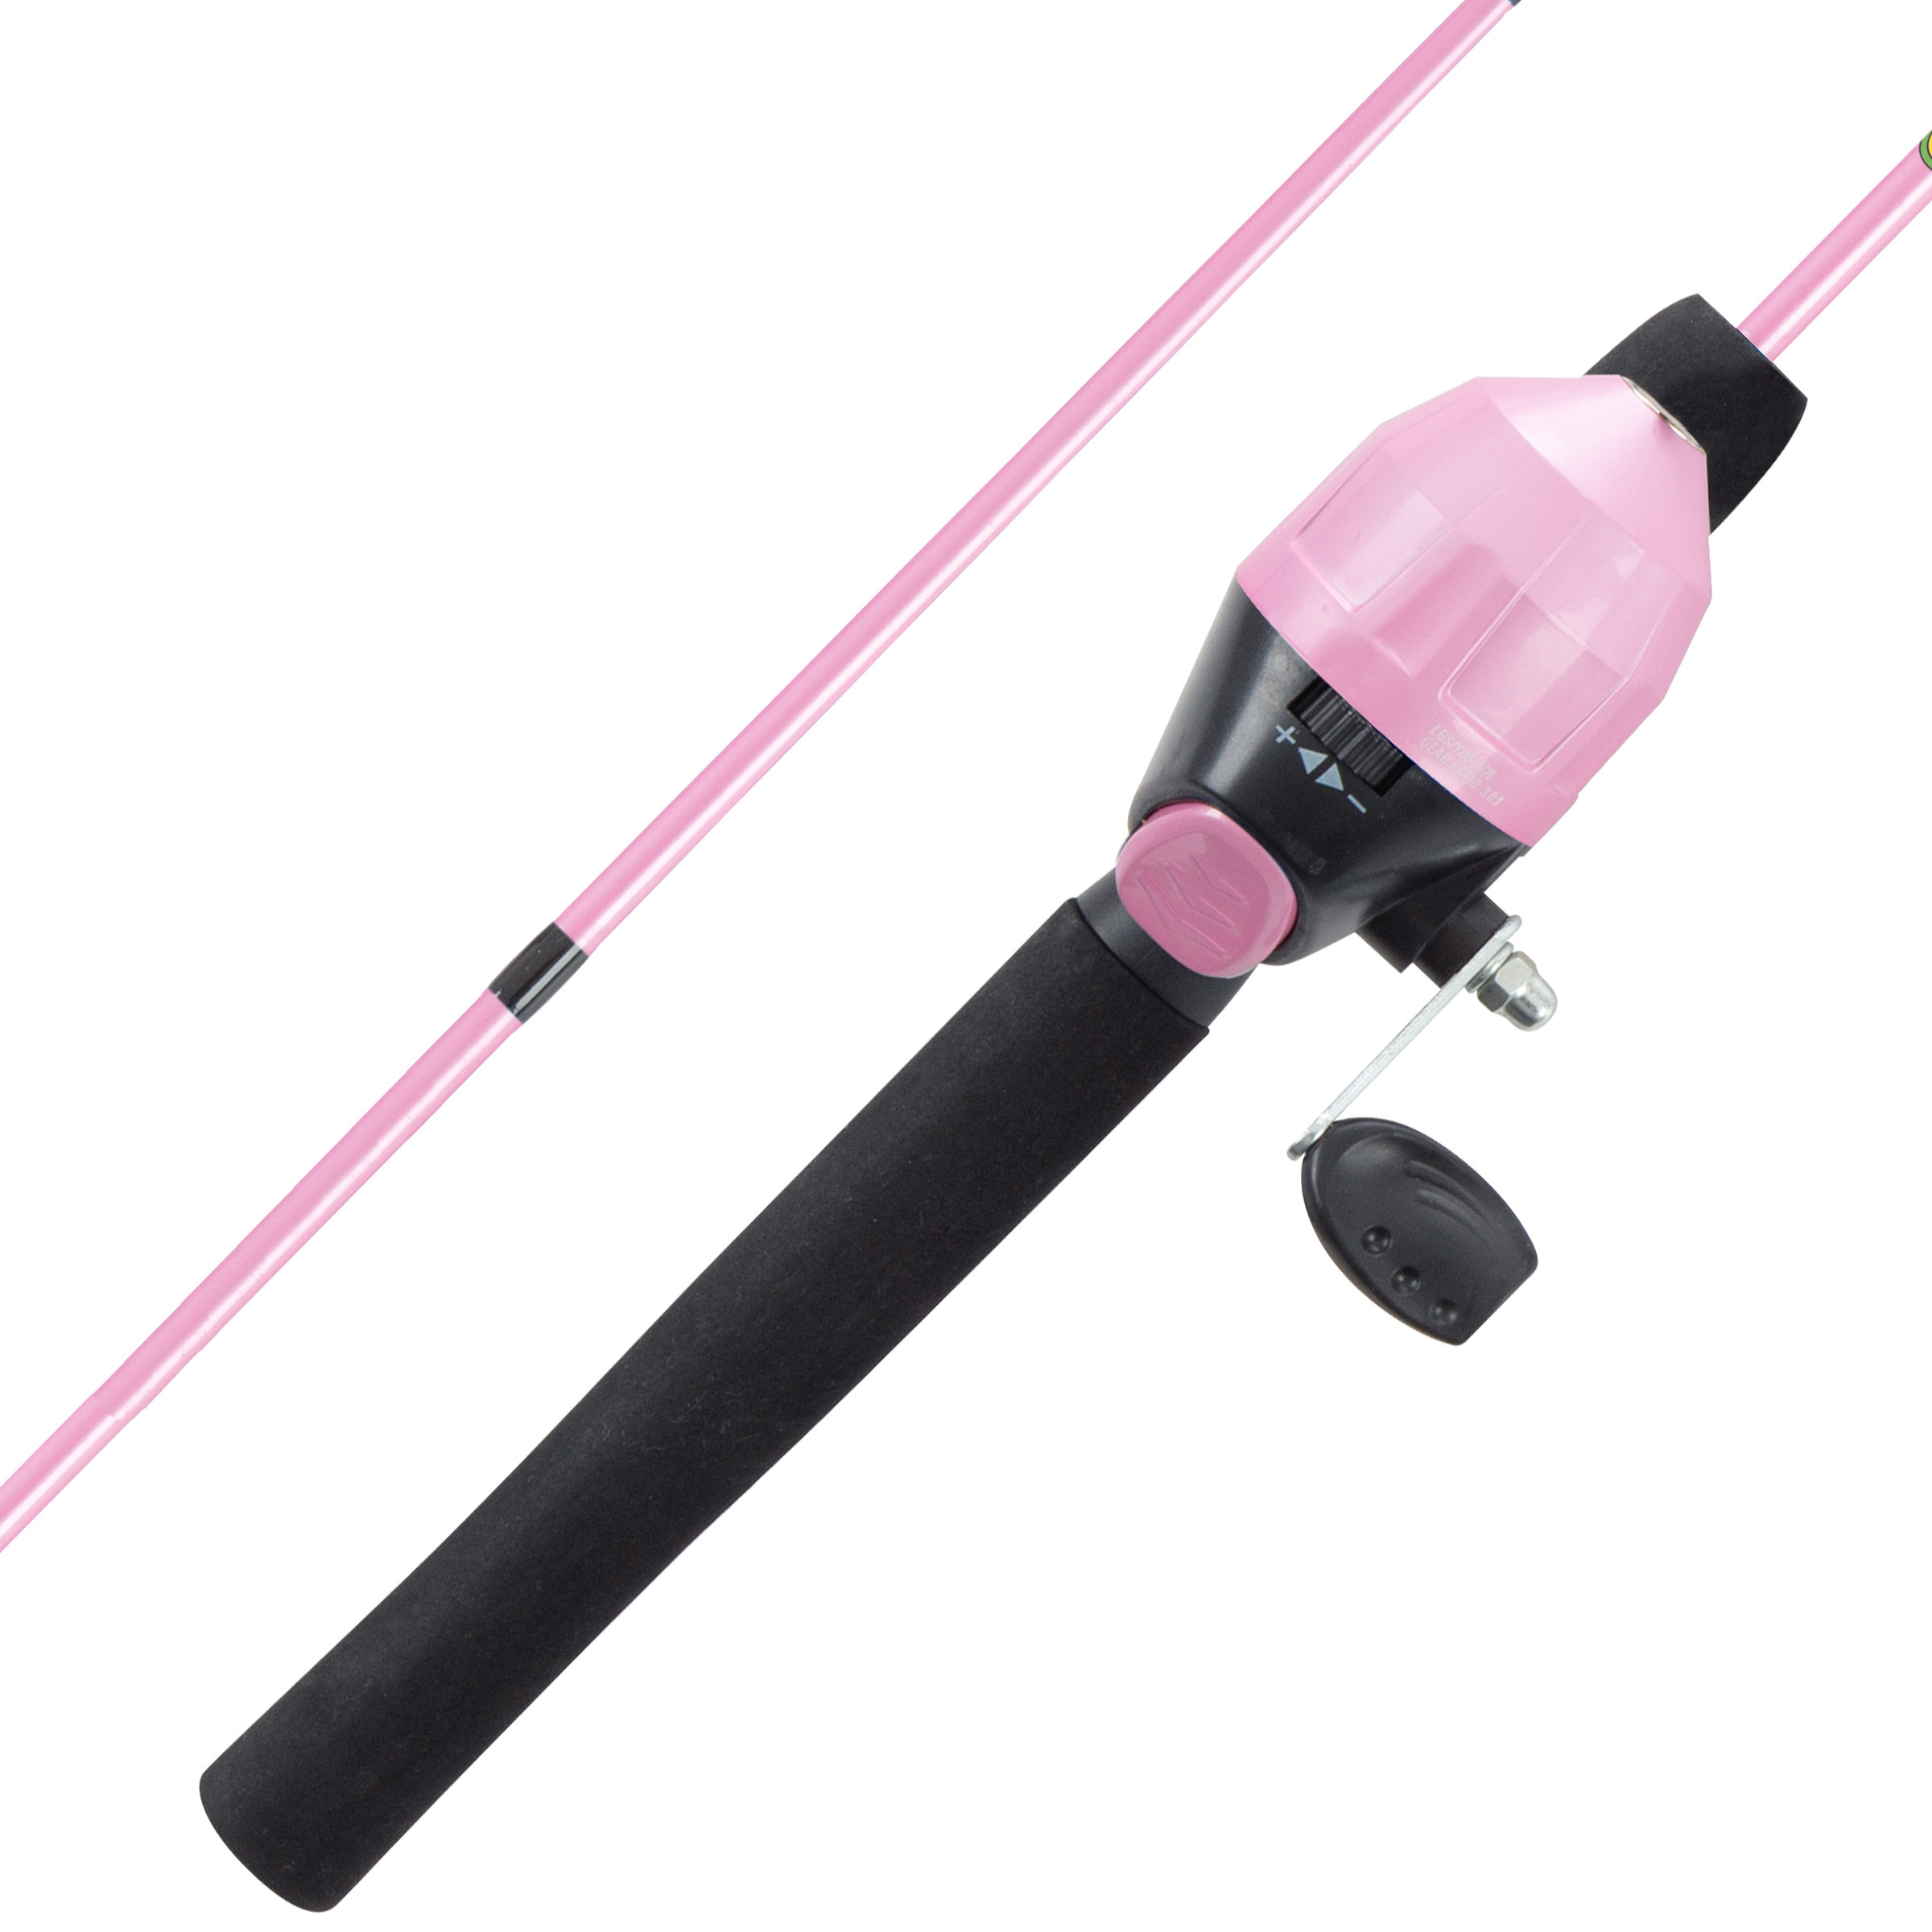 Youth Fishing Rod & Reel Combo-4’2” Fiberglass Pole, Spincast Reel & 8-Piece Tackle Kit for Kids & Beginners-Shallow Series (Pink) - image 1 of 7